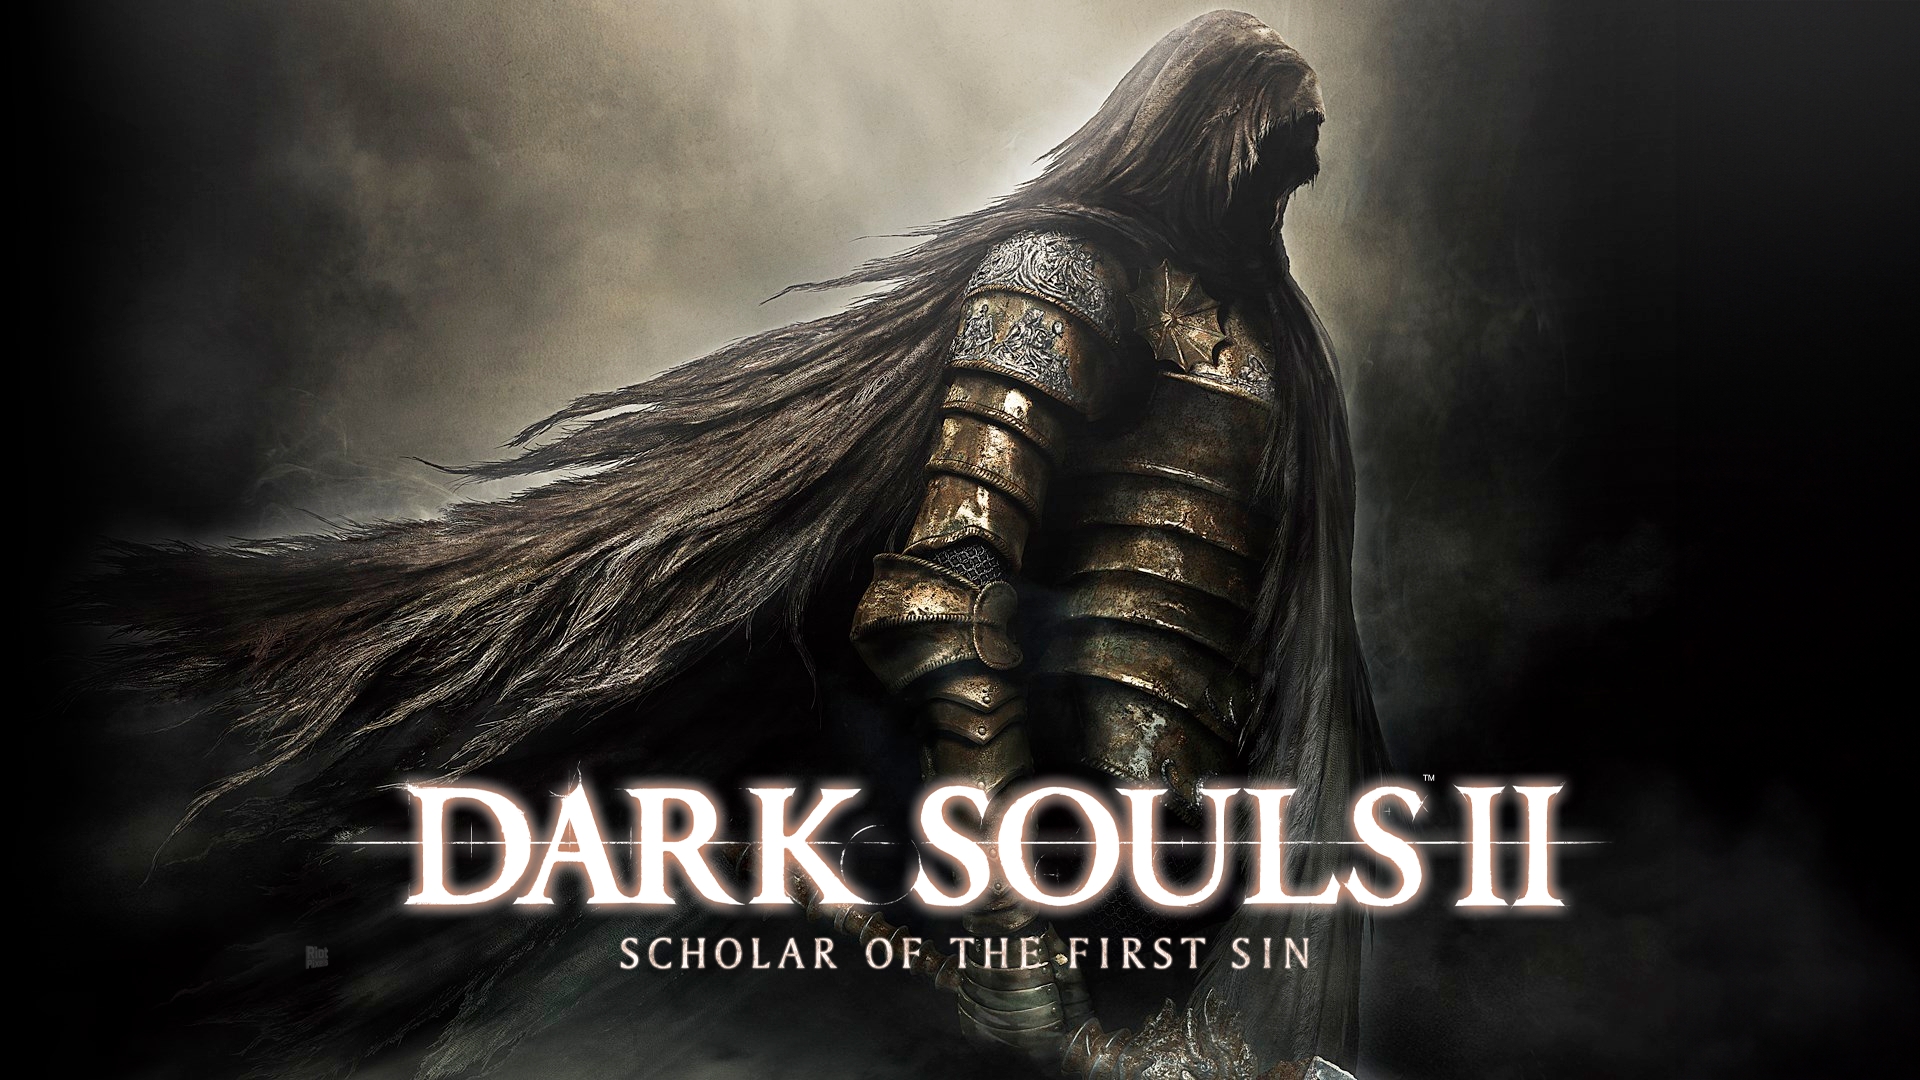 dark-souls-ii-scholar-of-the-first-sin-pc-game-steam-cover.jpg